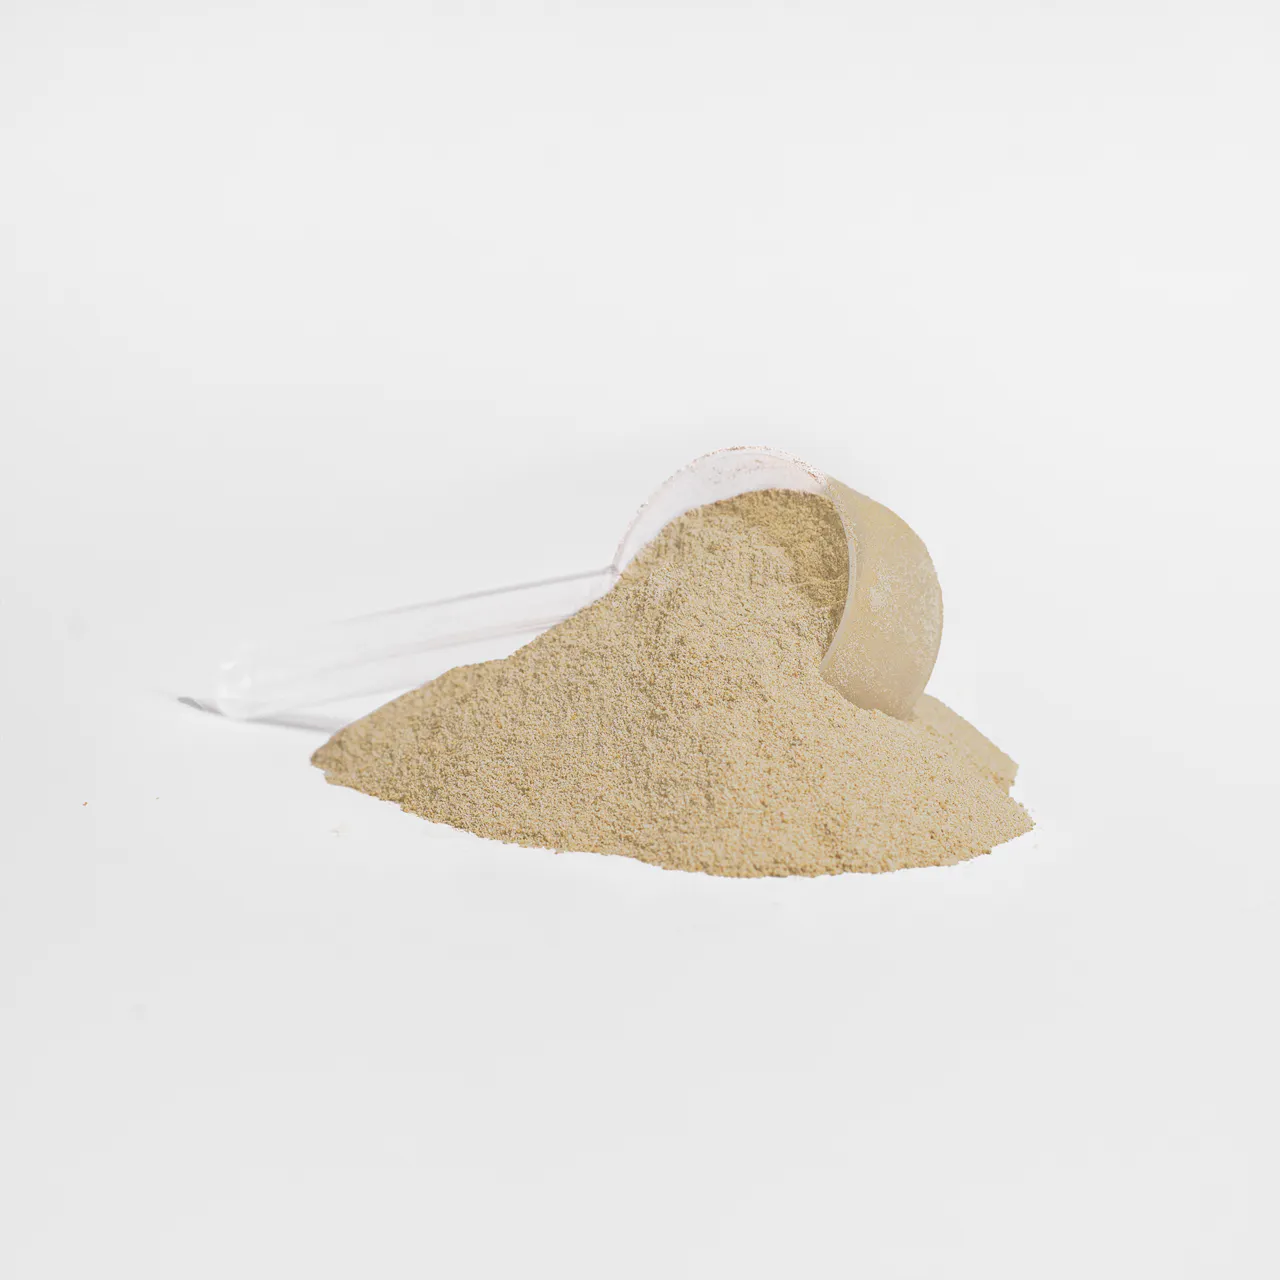 Protein powder, Fuel Your Fitness with Clean, Concentrated Whey Isolate.